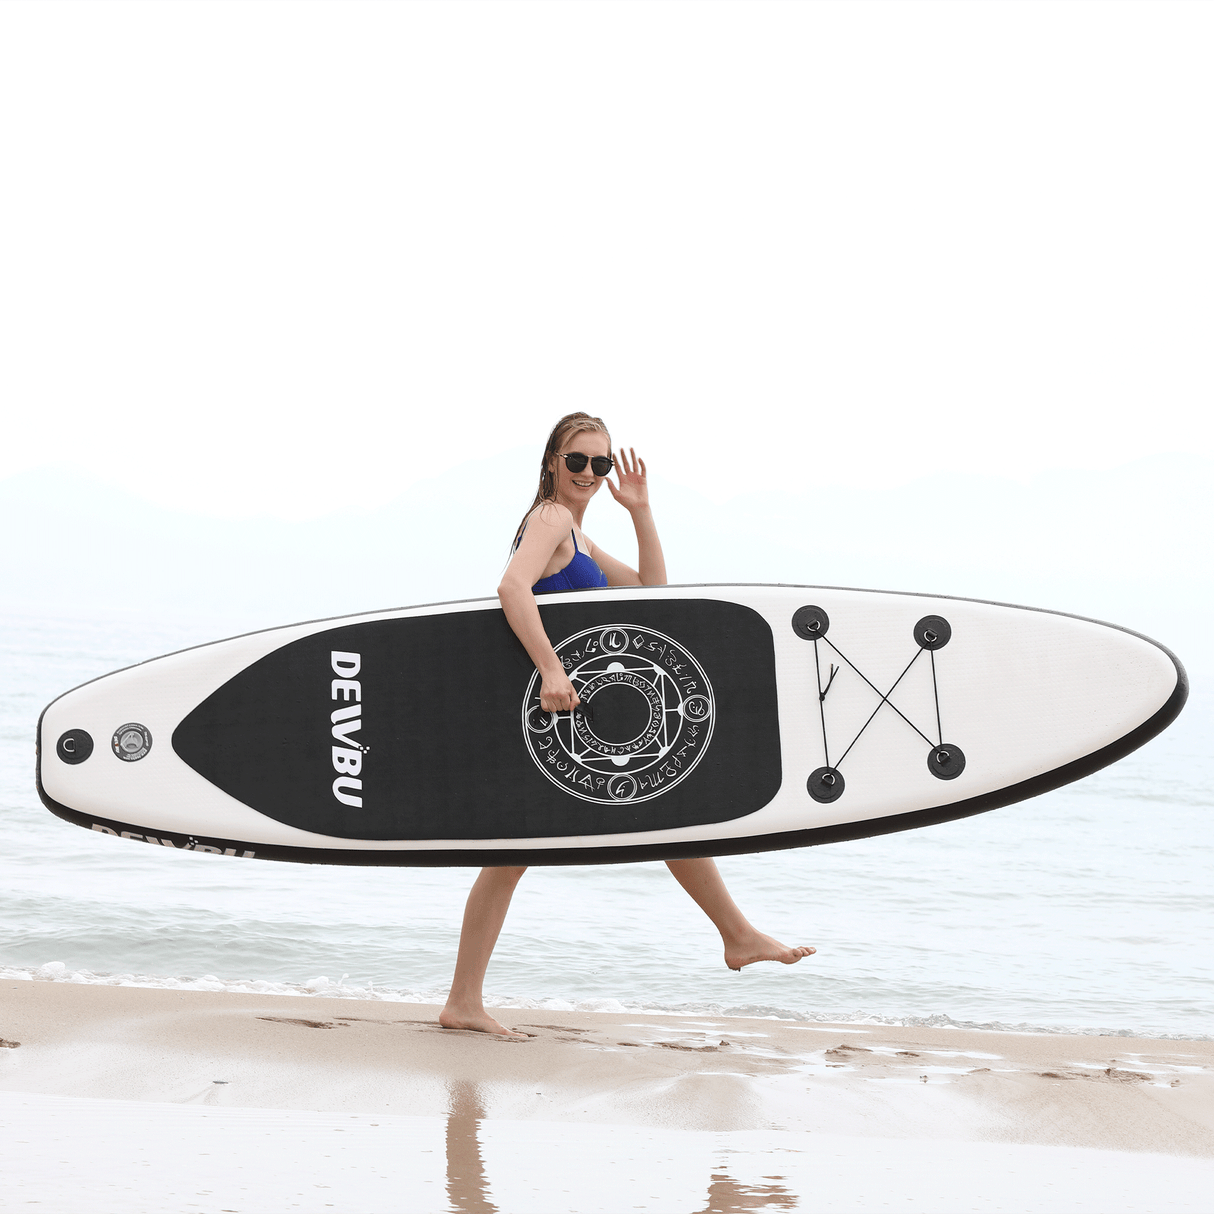 DEWBU Inflatable Stand Up Paddle Board with Paddle Surfboards-White/Black